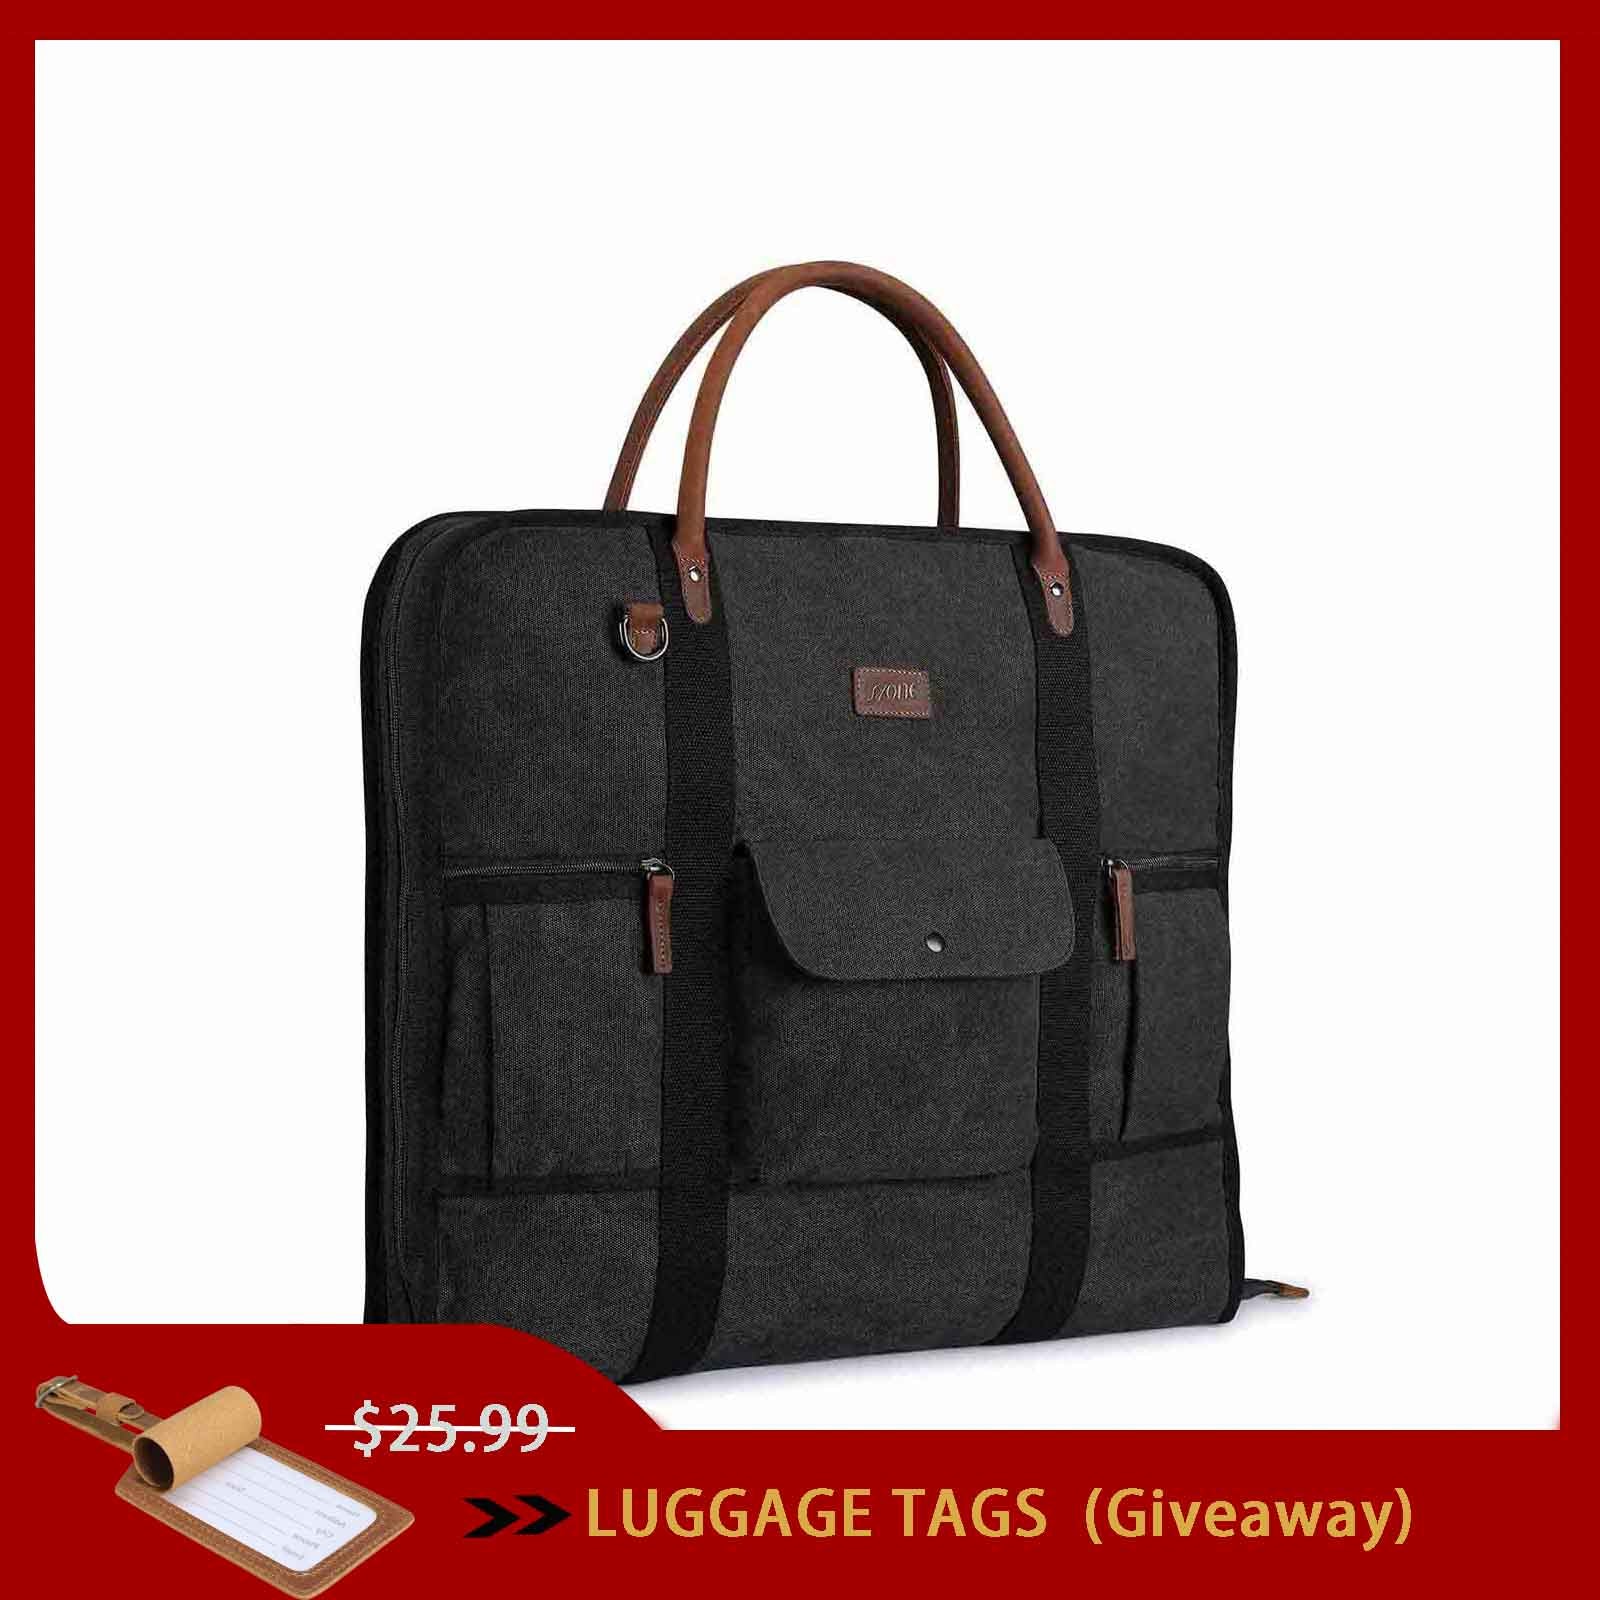  2 in 1 Canvas Leather Suit Luggage Garment Bag with Shoulder  Strap for Travel and Business Trips (Black)